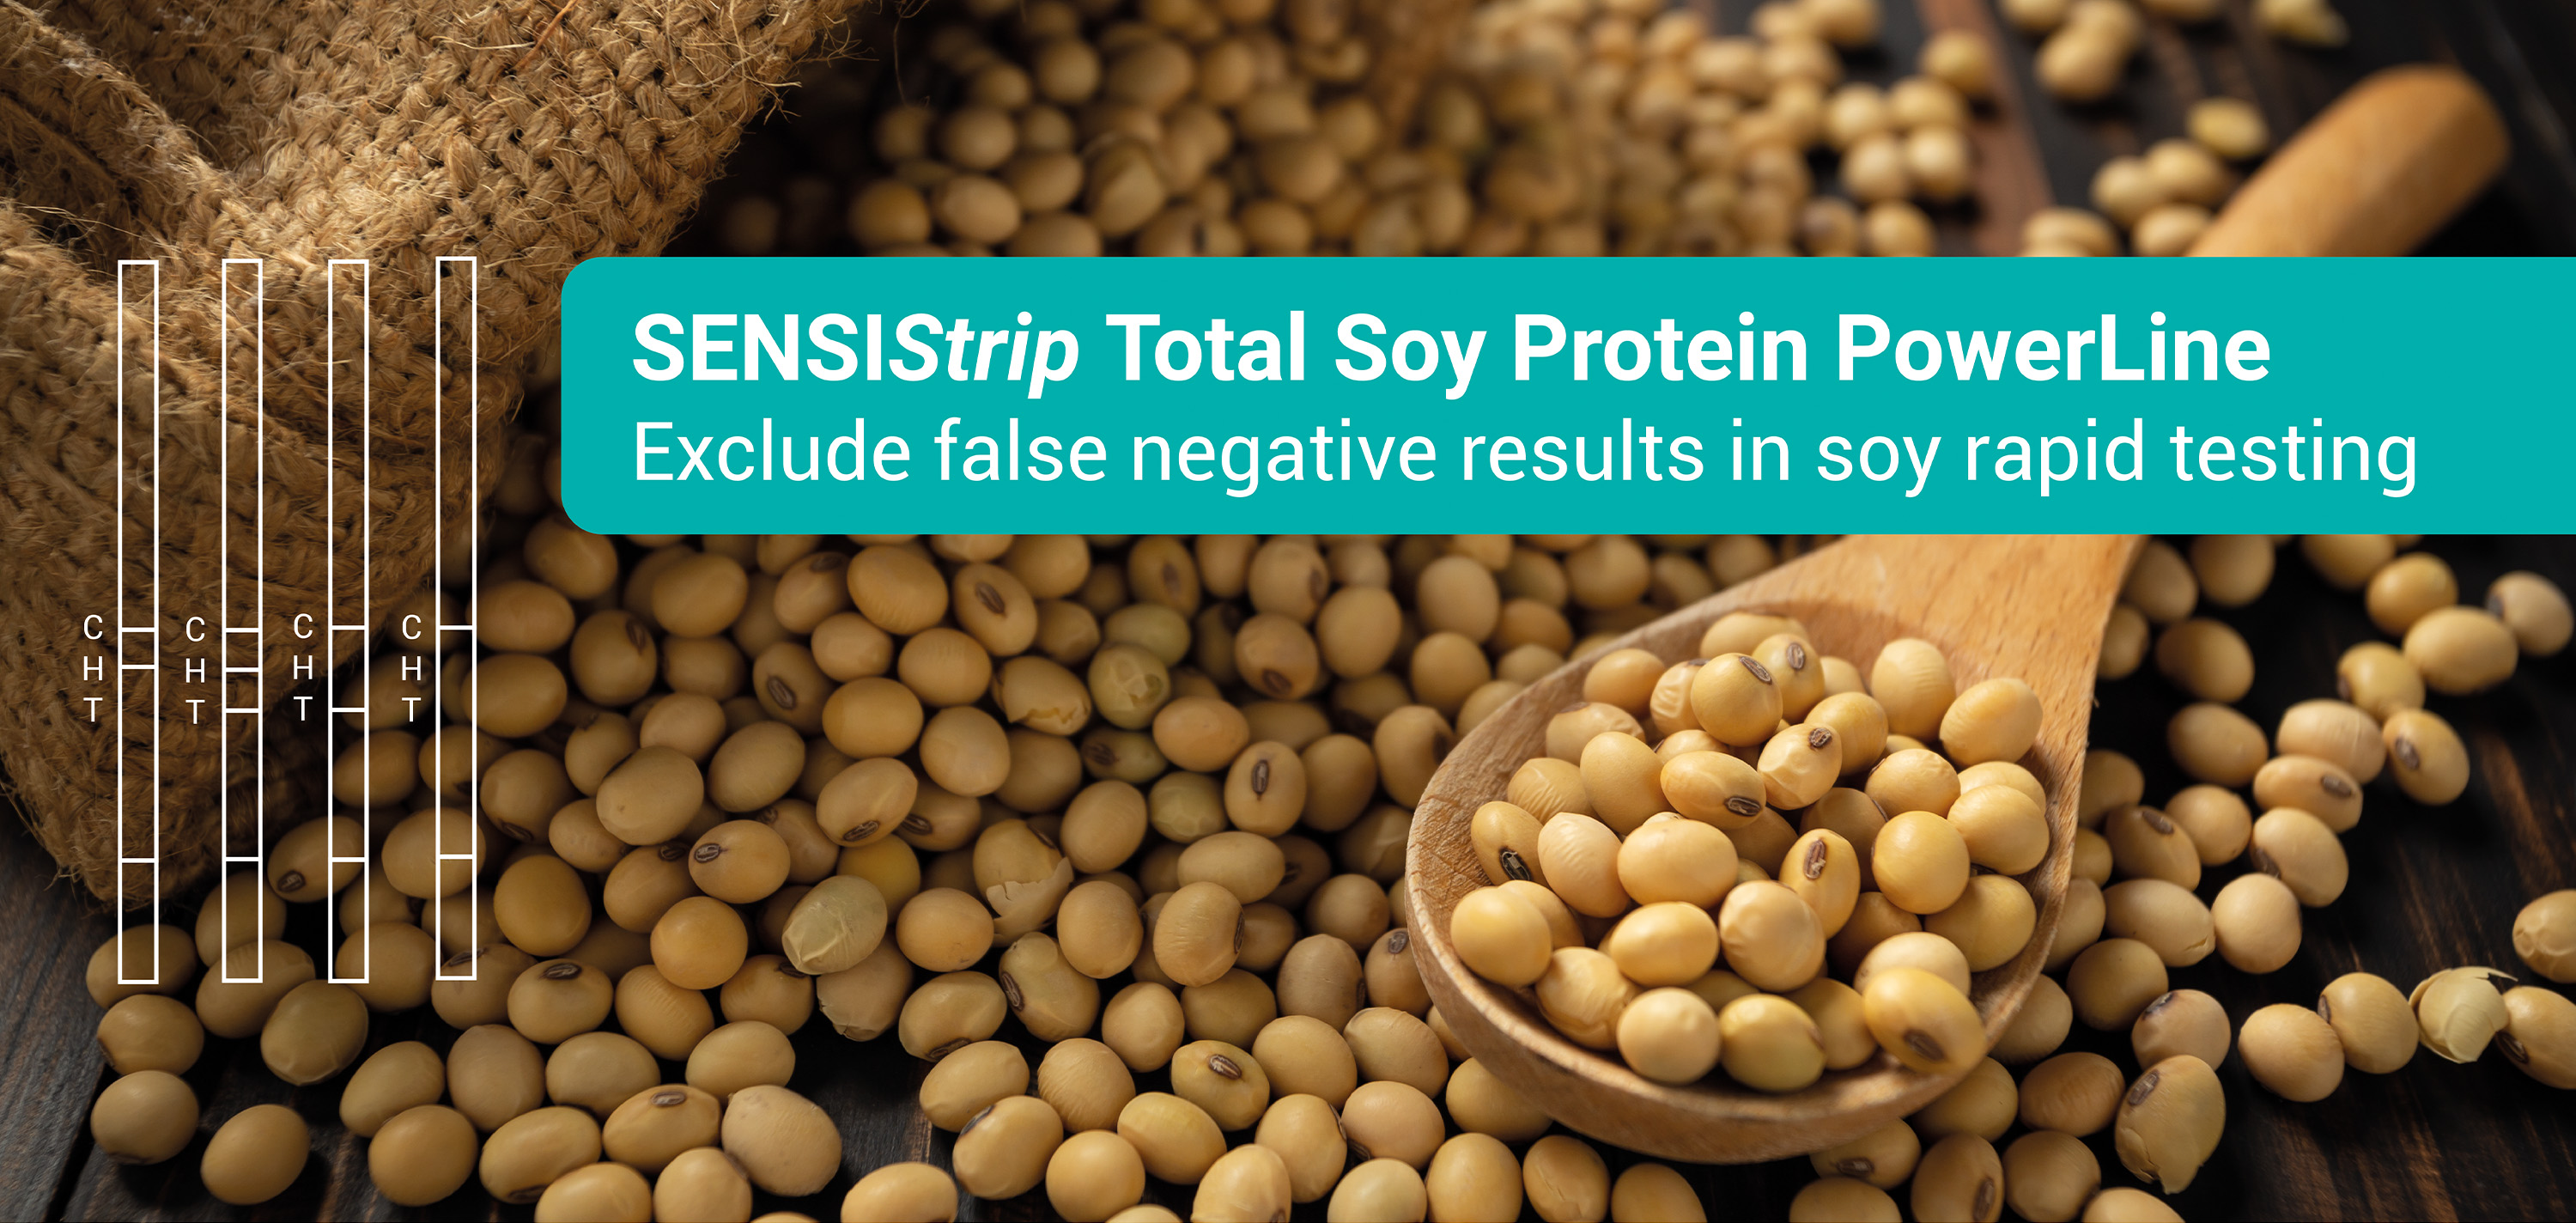 Sensitive and rapid Soy Protein testing: exclude false negatives with PowerLine!